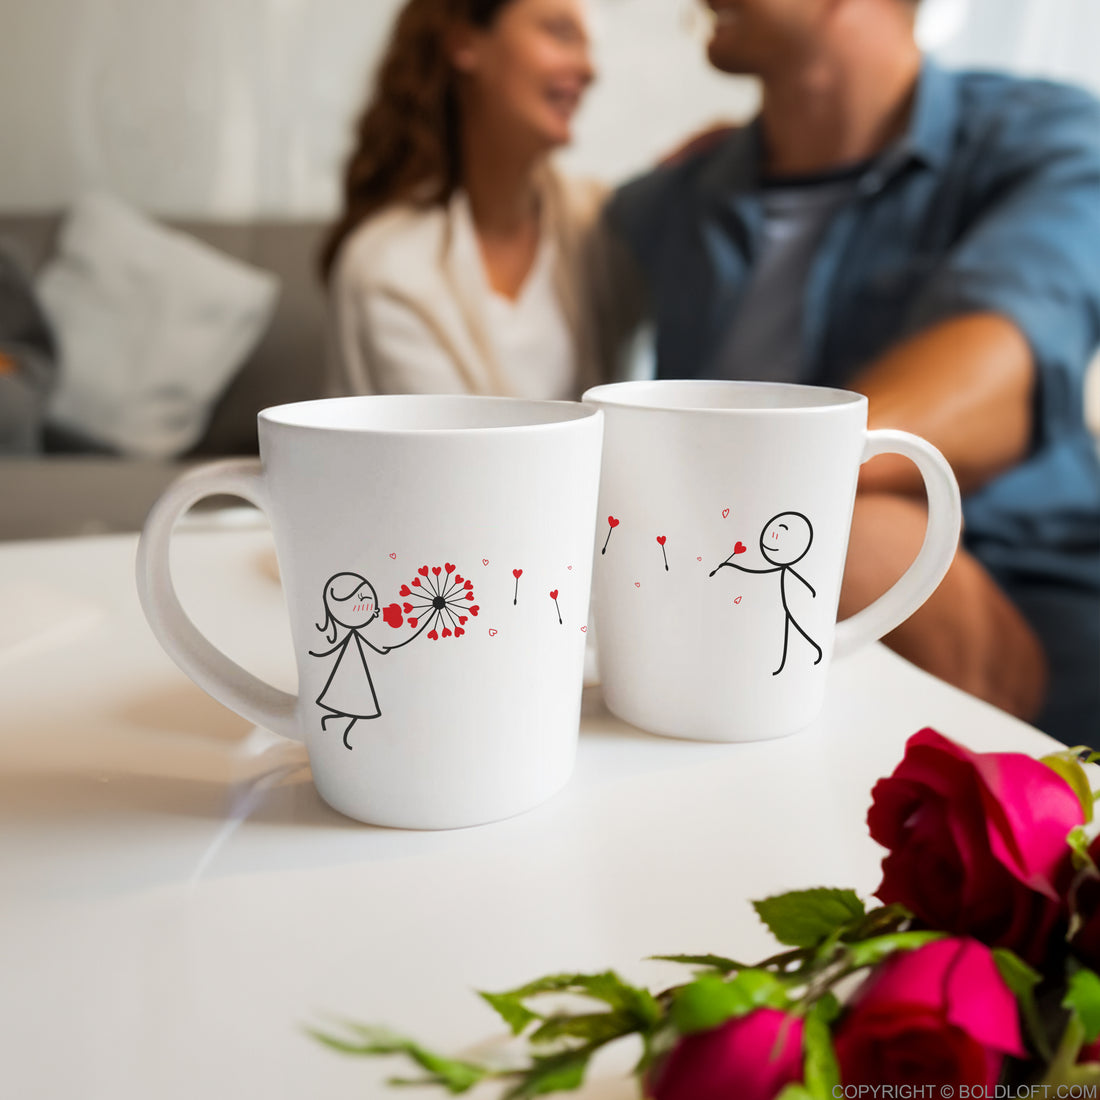 BoldLoft My Heart is All Yours Couple Mugs, his and hers coffee mugs feature 2 stick figures and a heartfelt message